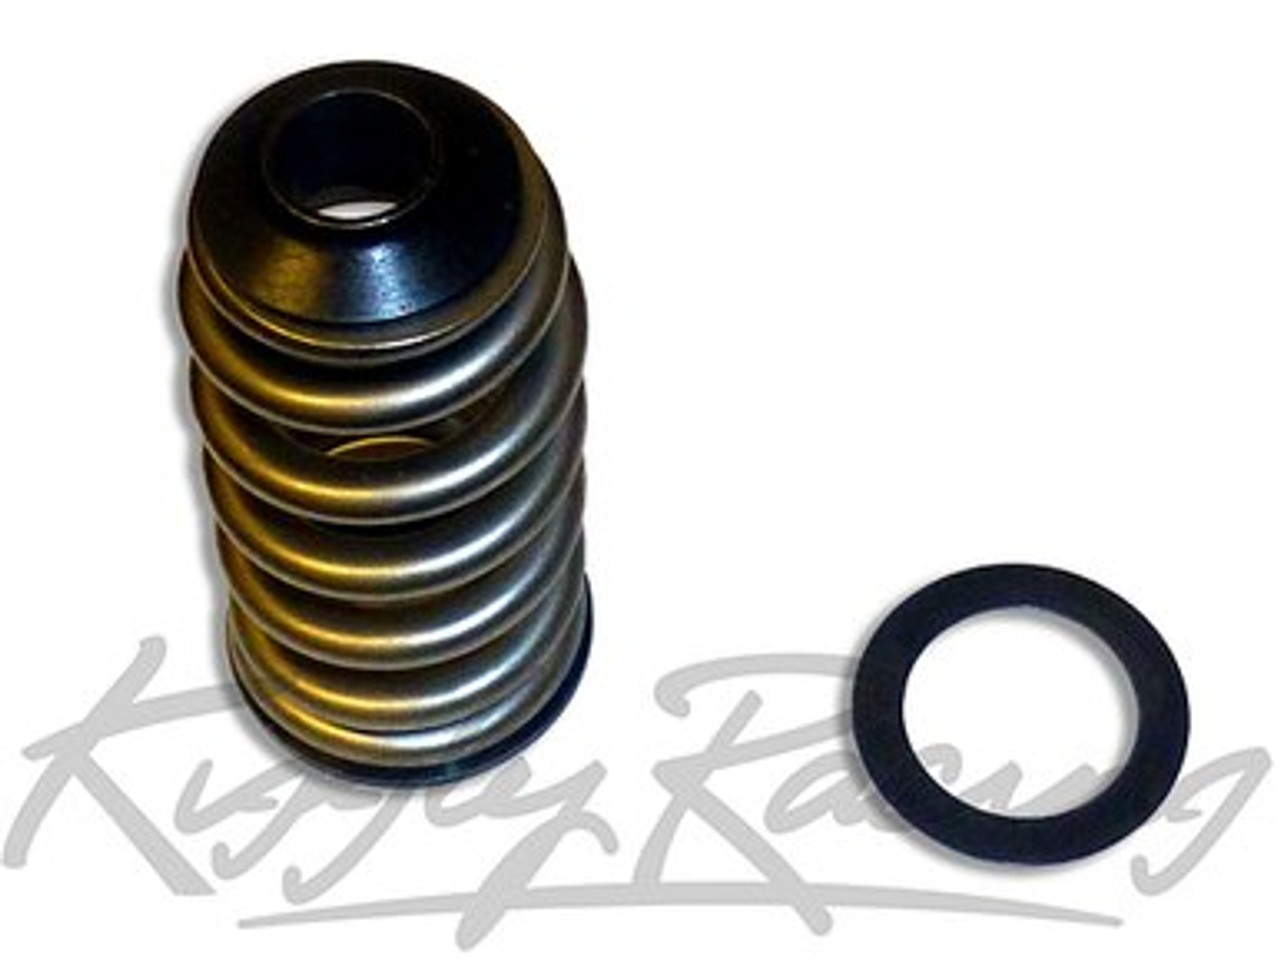 Kiggly Racing Race Only Valve Spring Shim